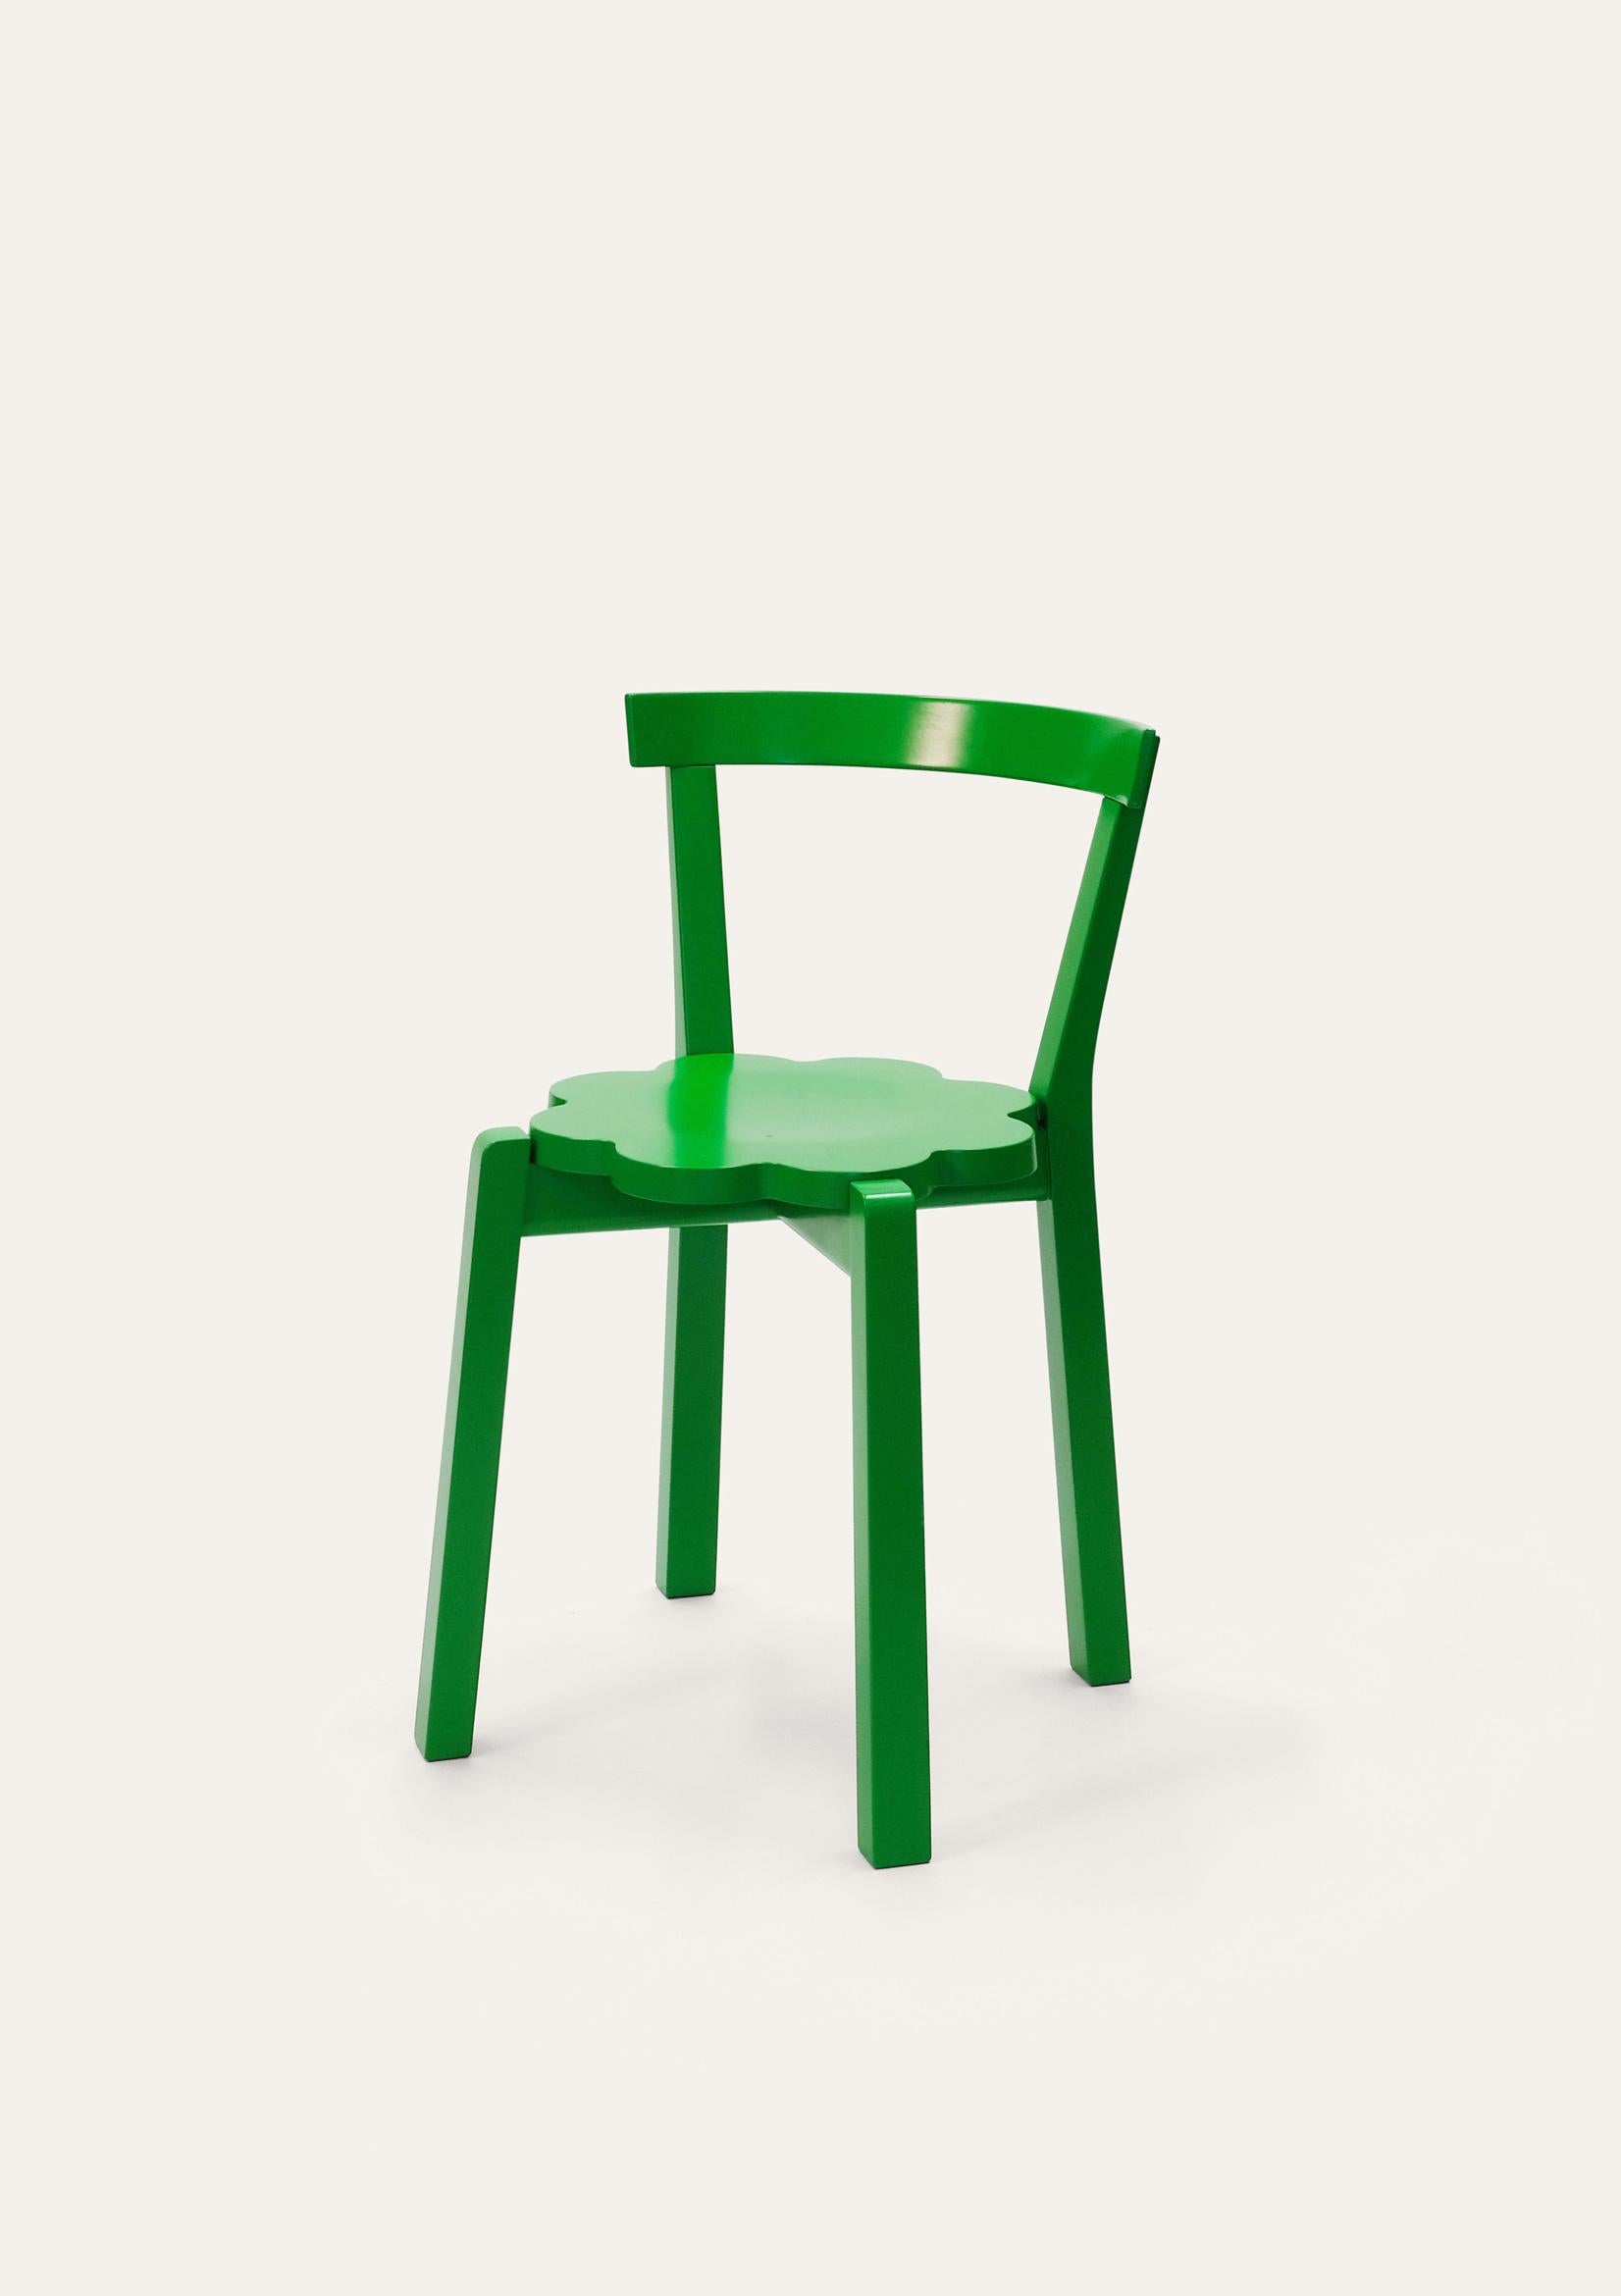 Green blossom chair by Storängen Design
Dimensions: D 46 x W 41 x H 72 x SH 45cm
Materials: birch wood.
Available in other colors and sizes.

A small and neat stackable chair, which works well round tables in cafes and living rooms.
A clean